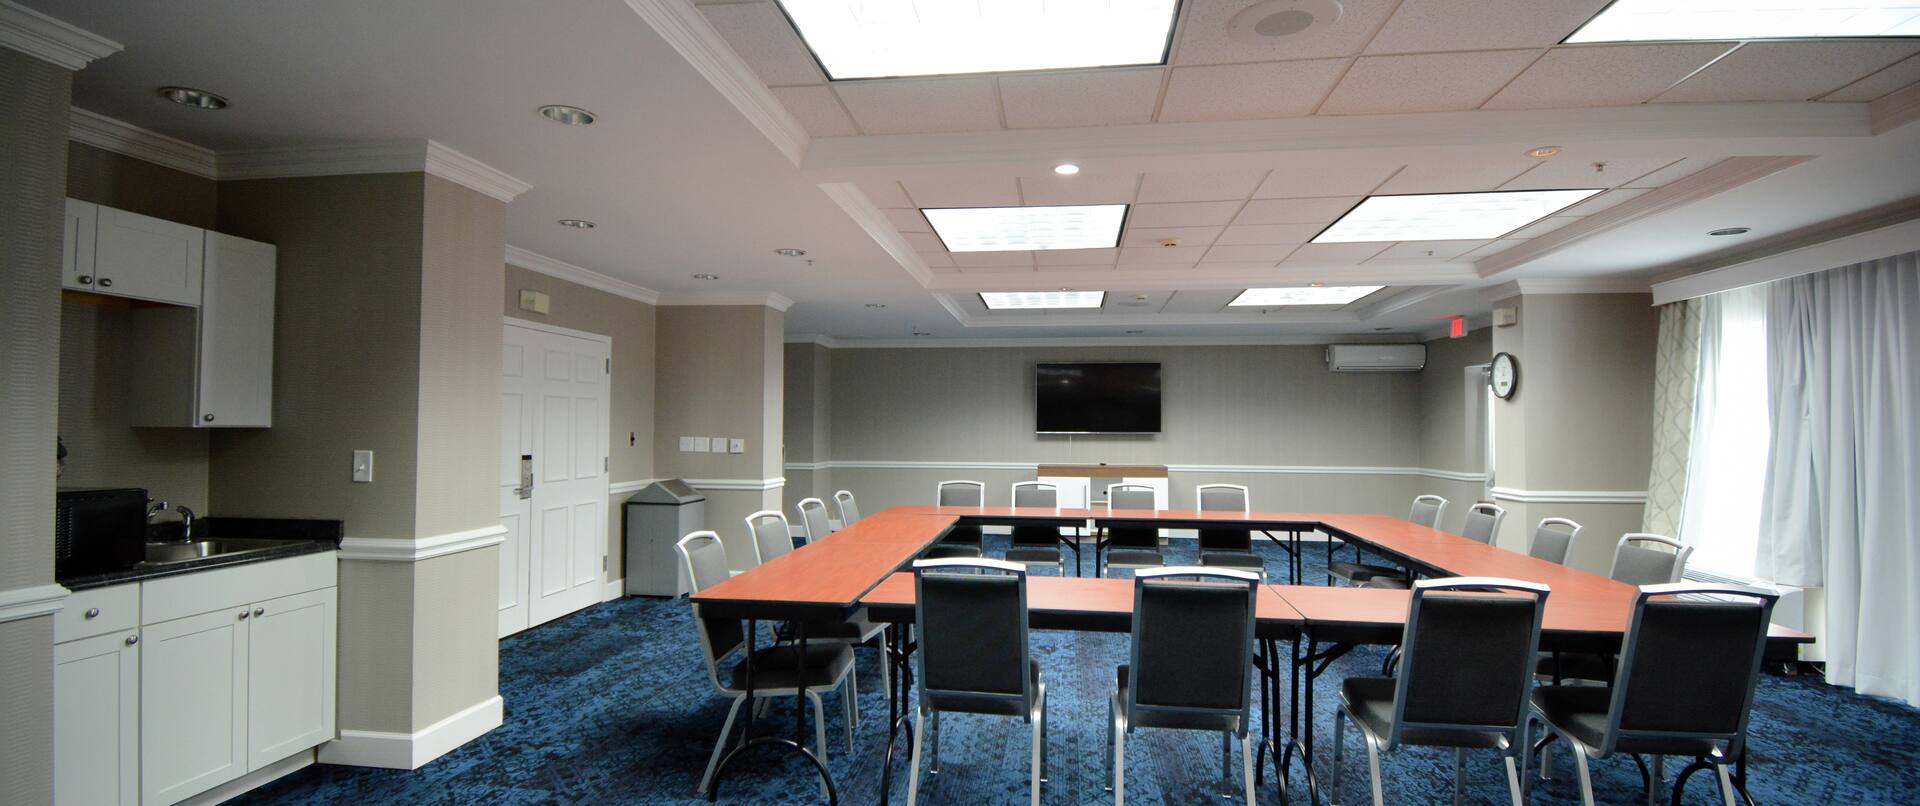 Conference Center in a Square Seating Set Up with a Wet Bar including a Microwave and Large Screen